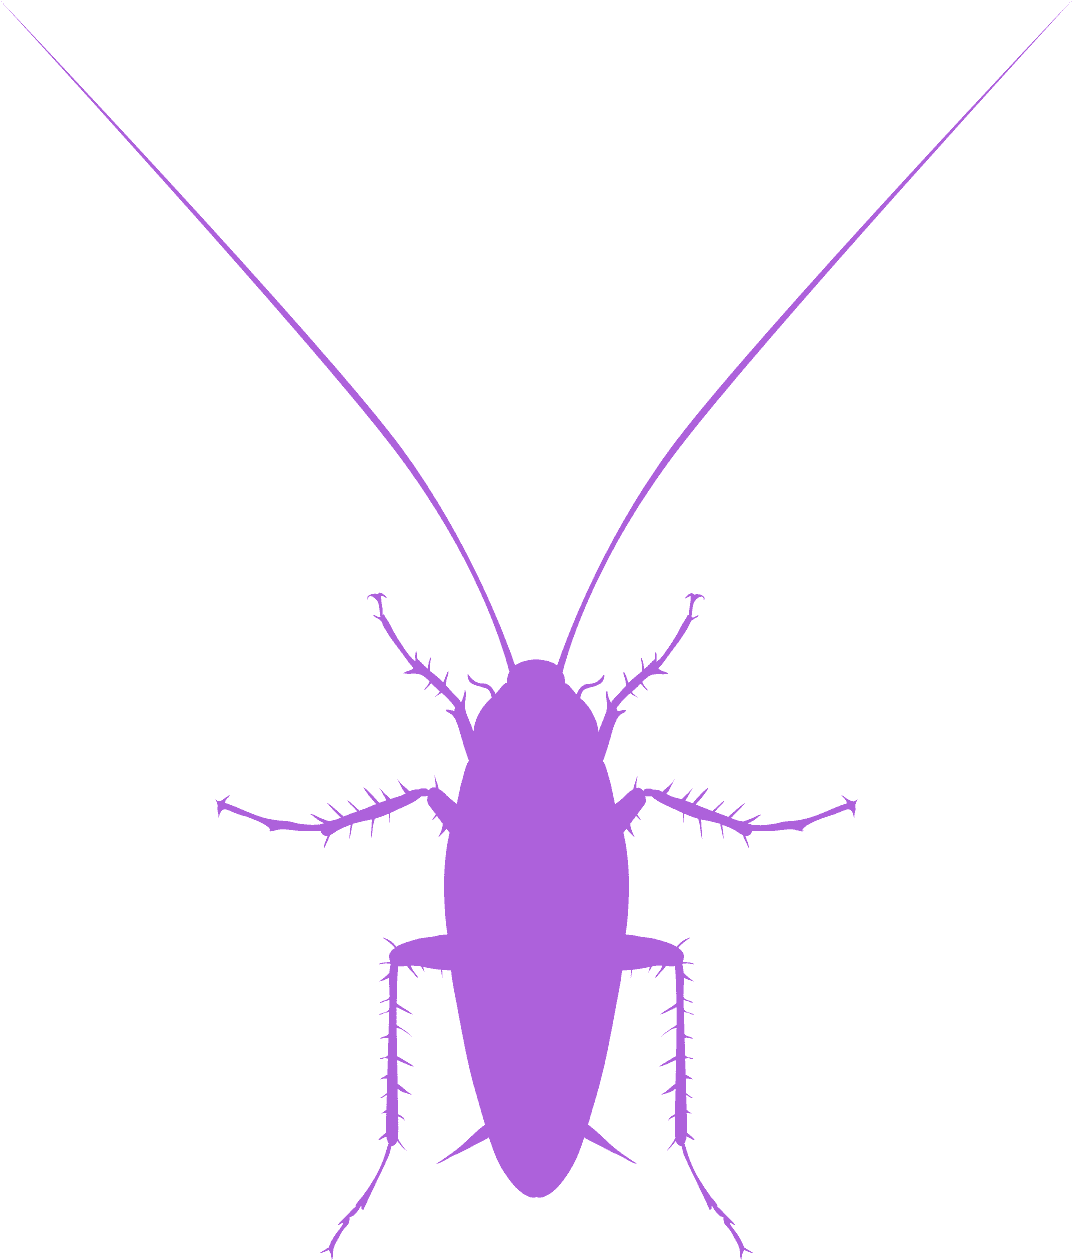 Cockroach Silhouette Graphic PNG image